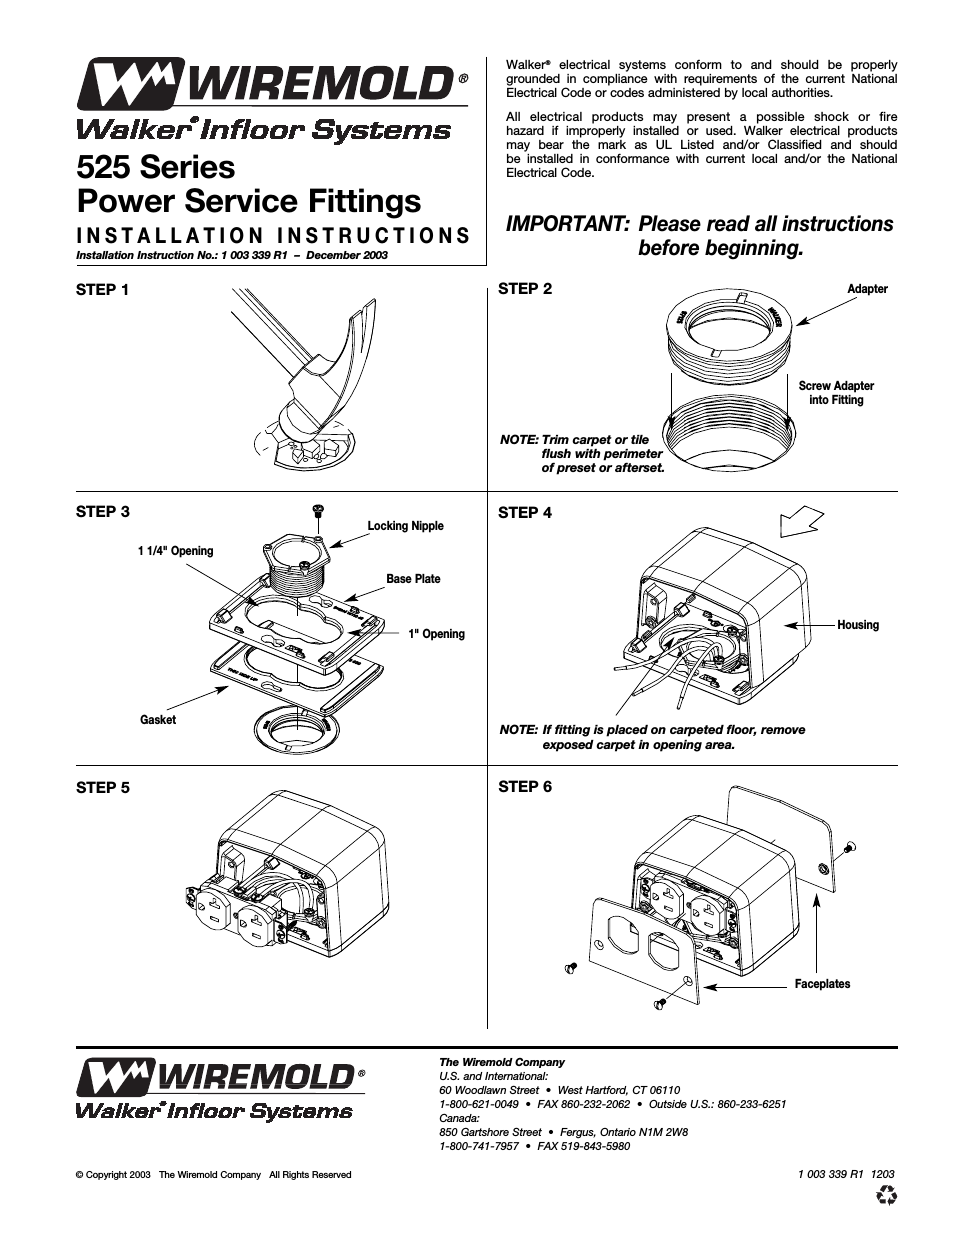 525 Series Service Fittings